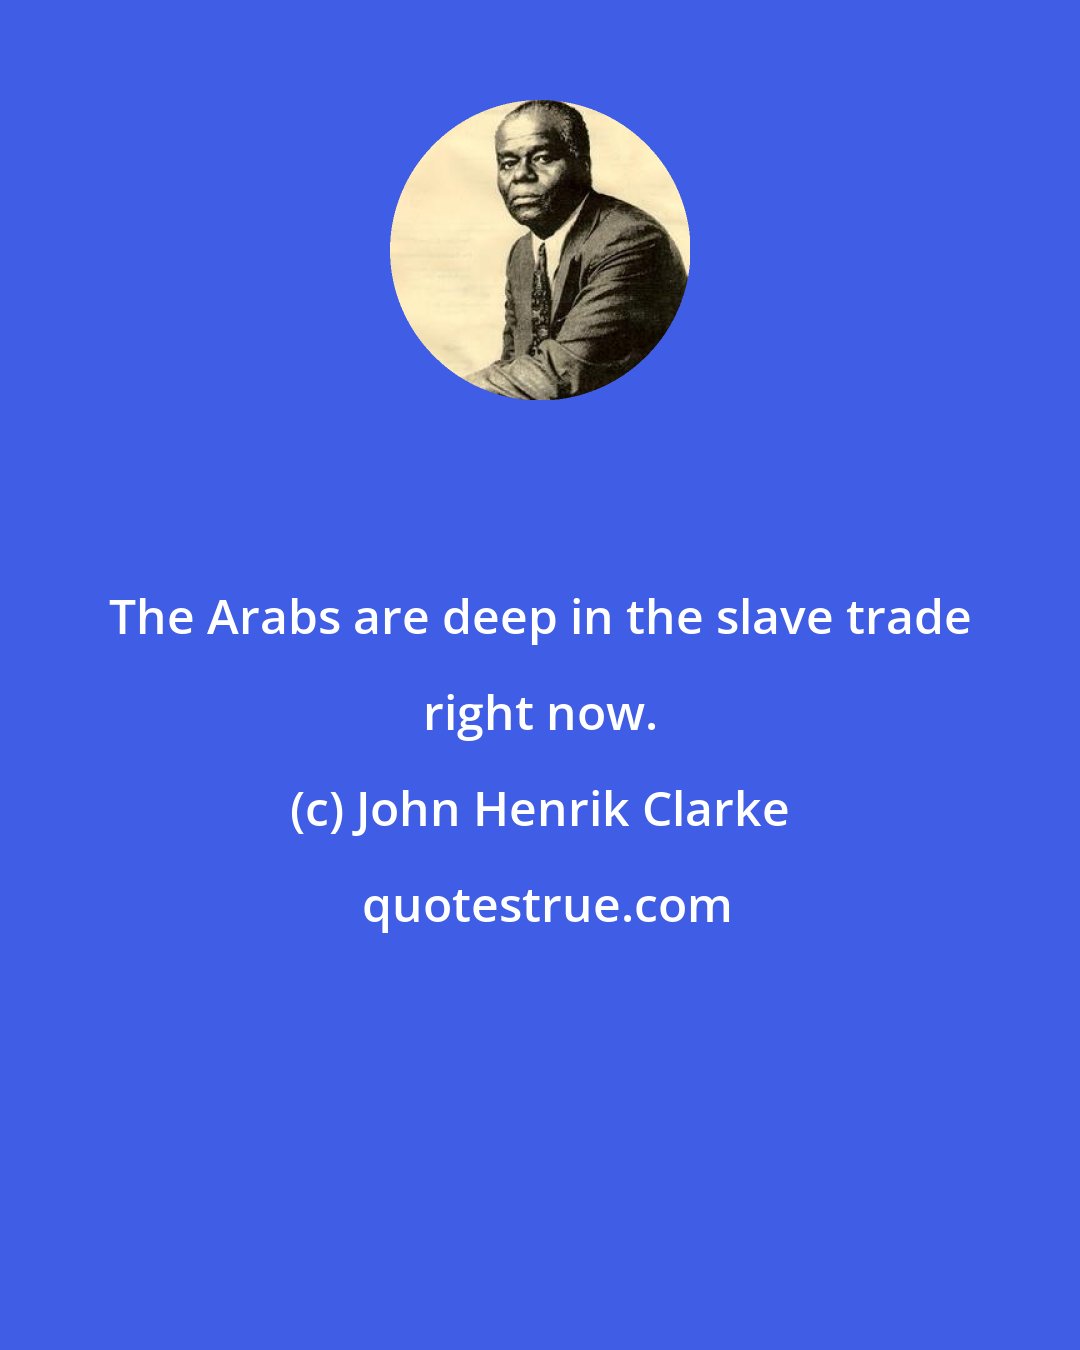 John Henrik Clarke: The Arabs are deep in the slave trade right now.